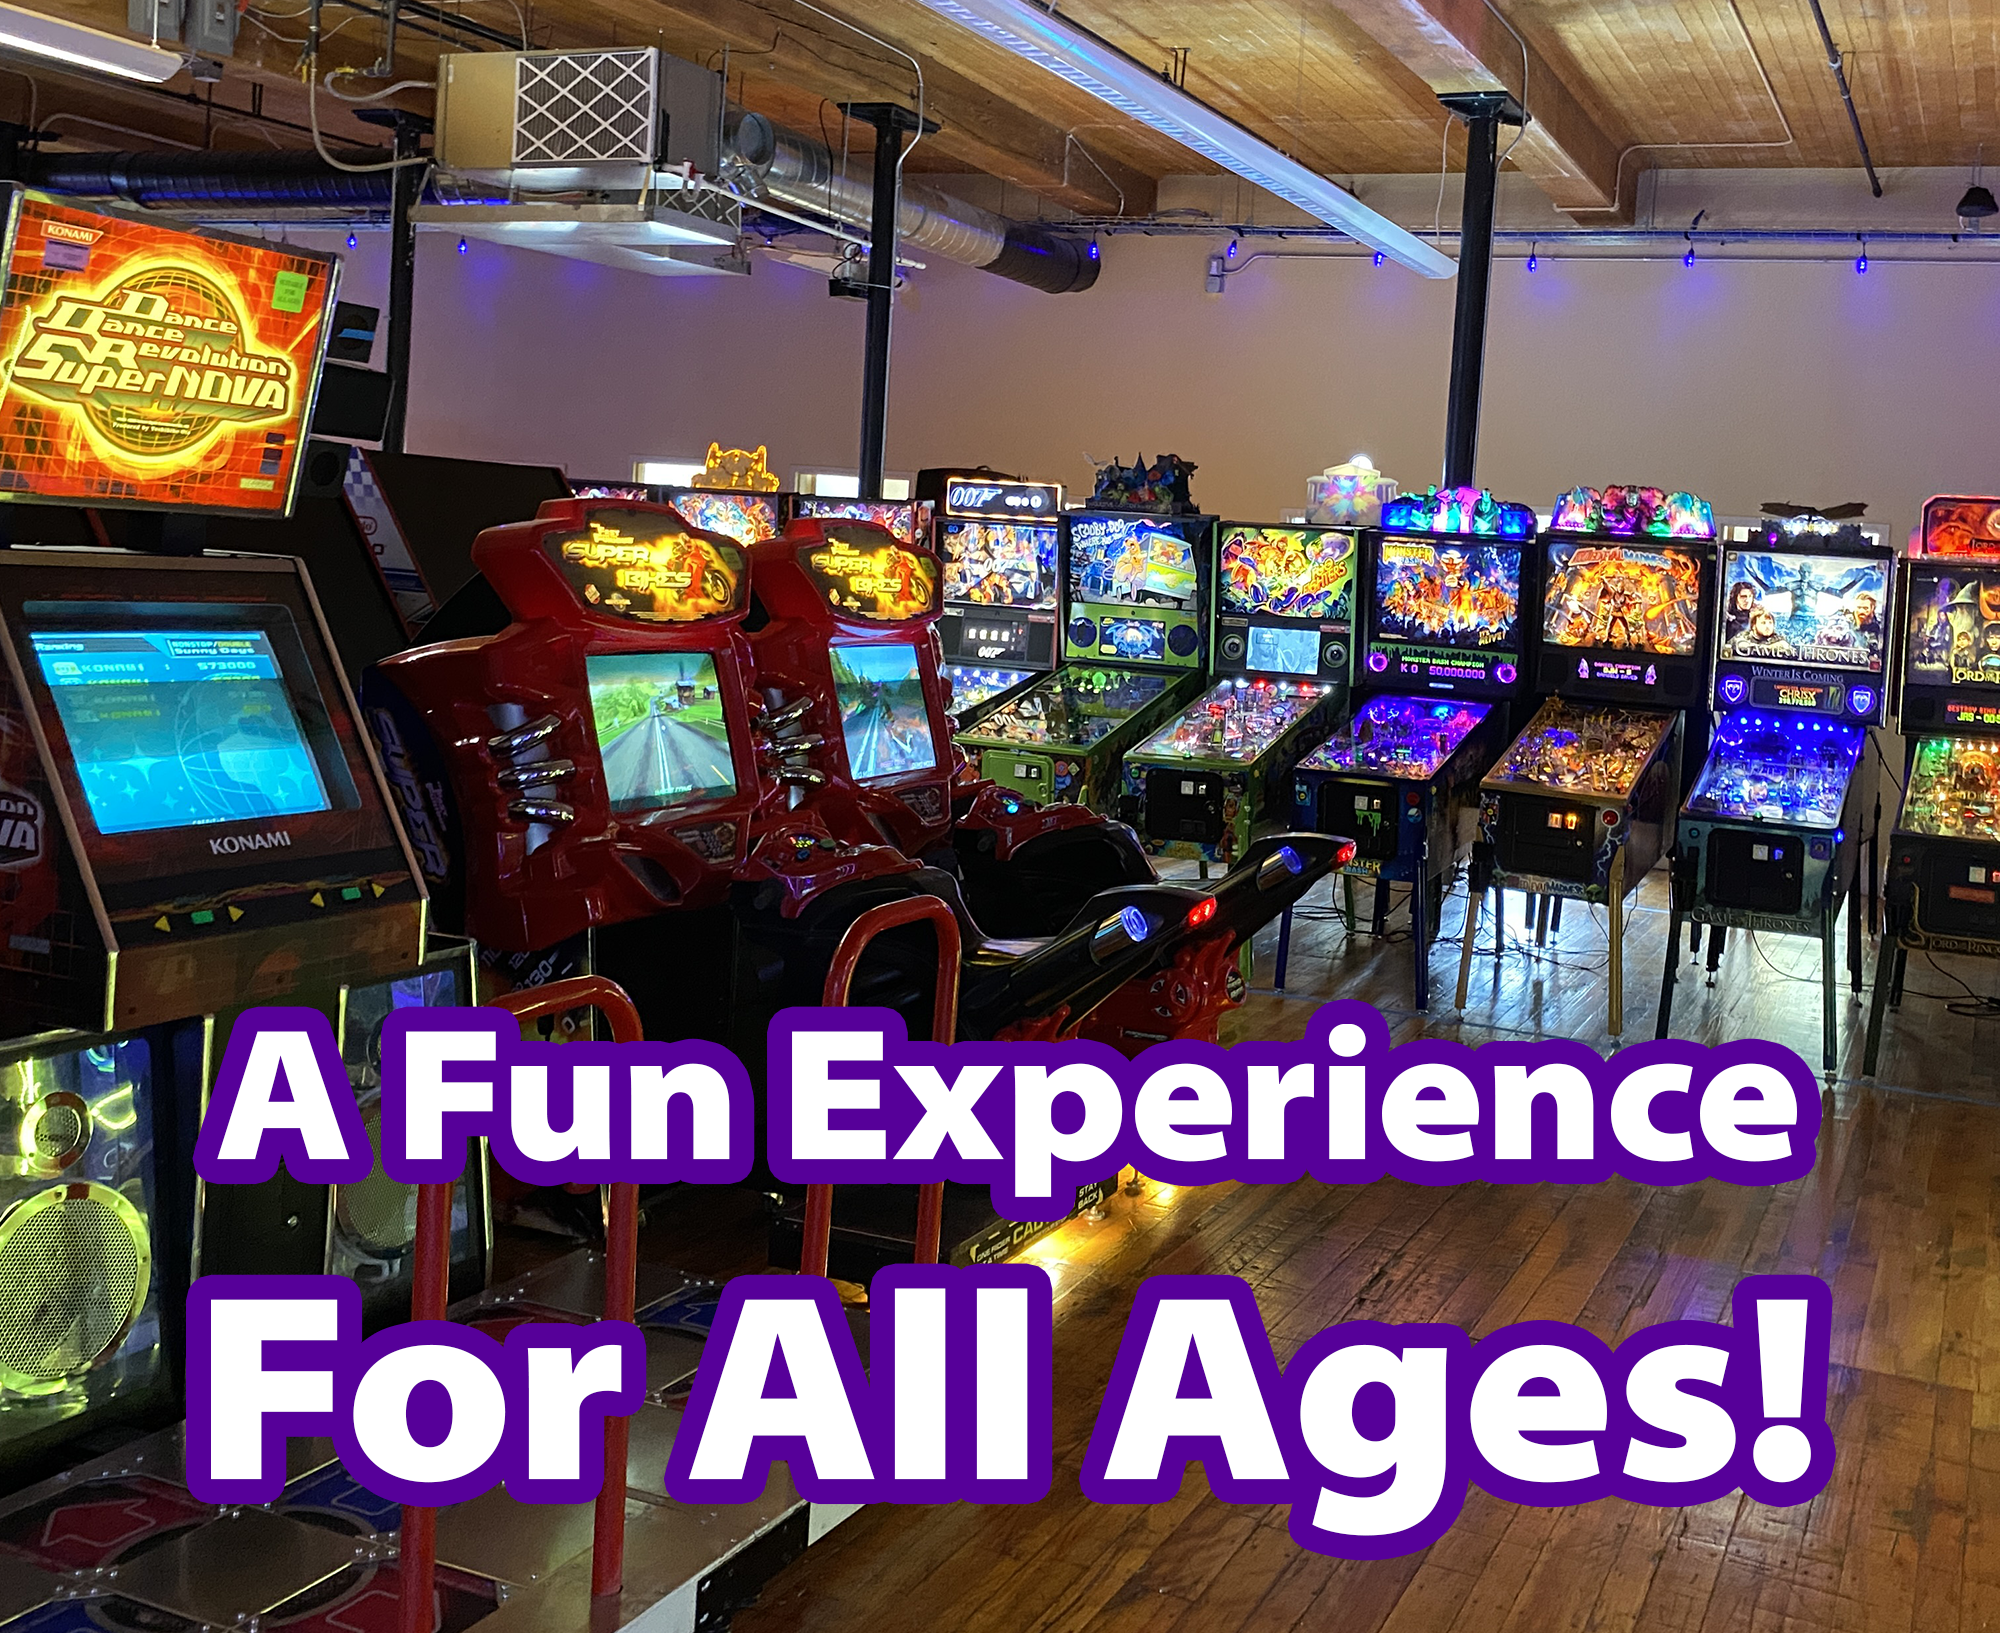 a fun arcade experience for the whole family for all ages